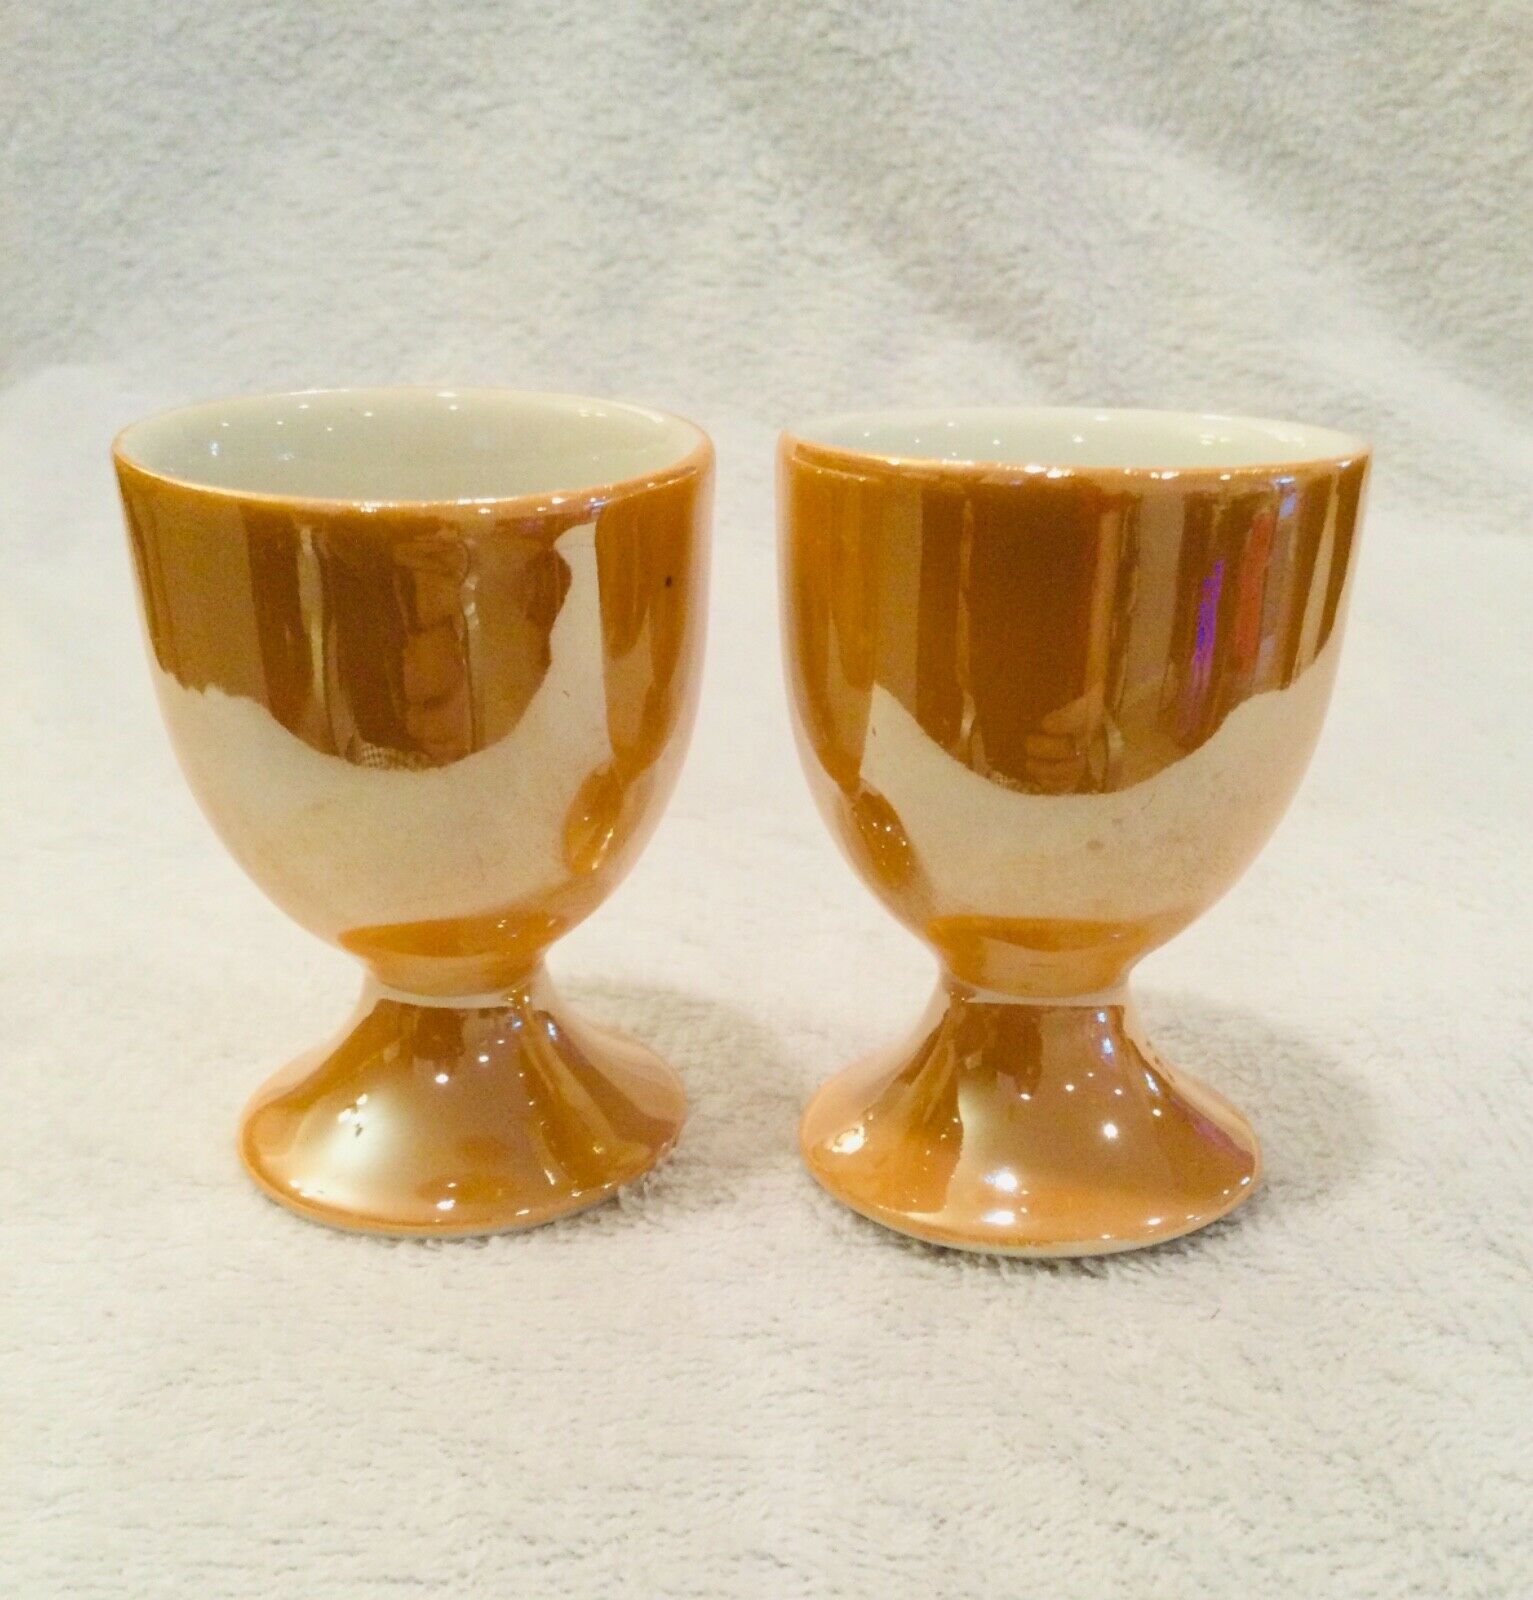 Vintage Lusterware Iridescent Egg Cups Peach Orange Made In Germany